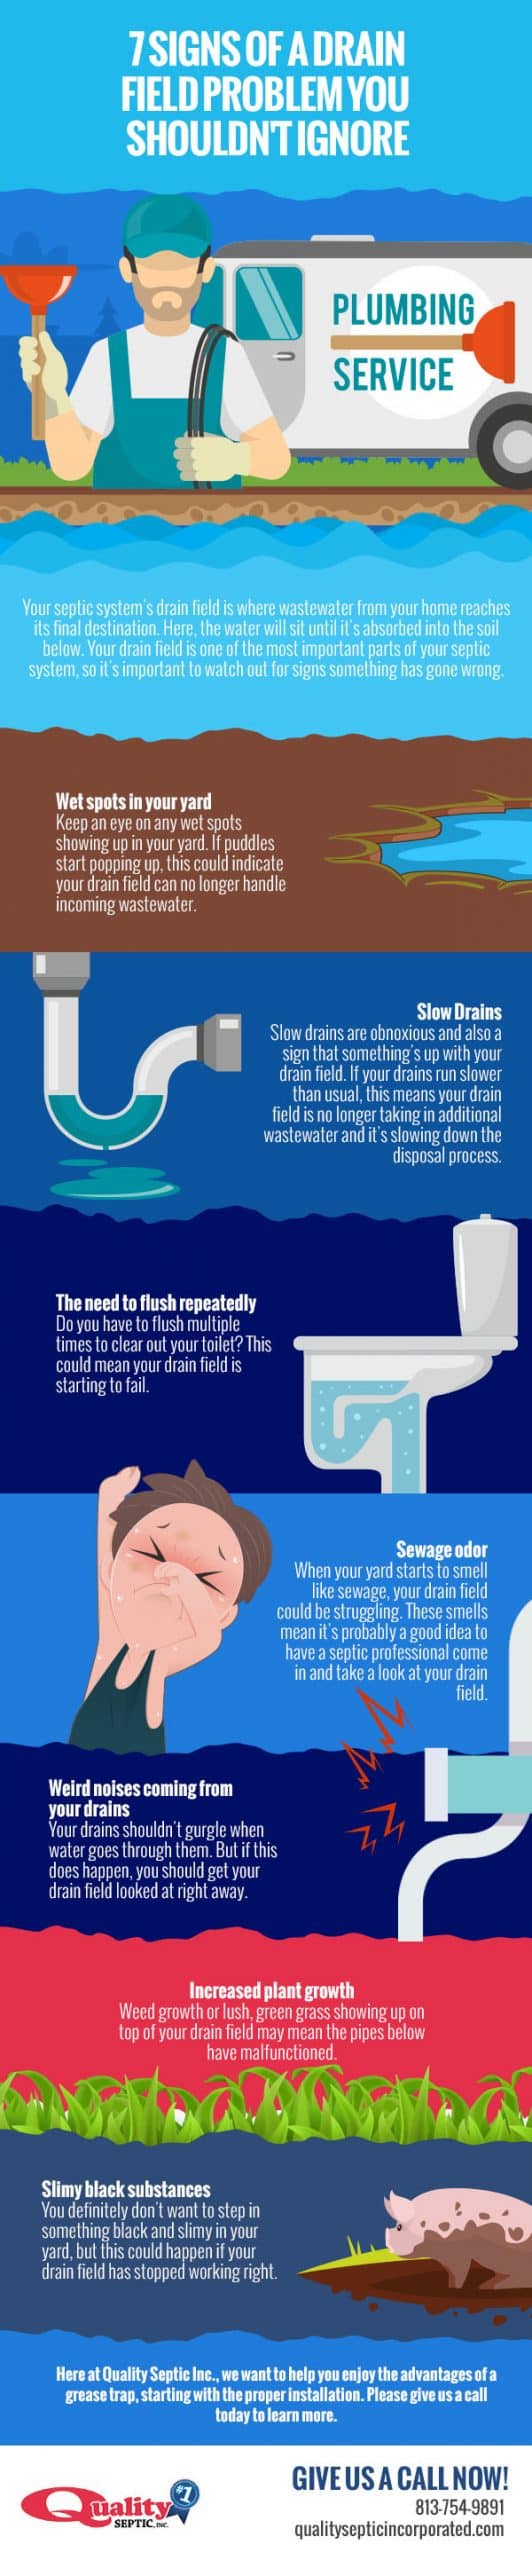 7 Signs of a Drain Field Problem You Shouldn't Ignore [infographic]